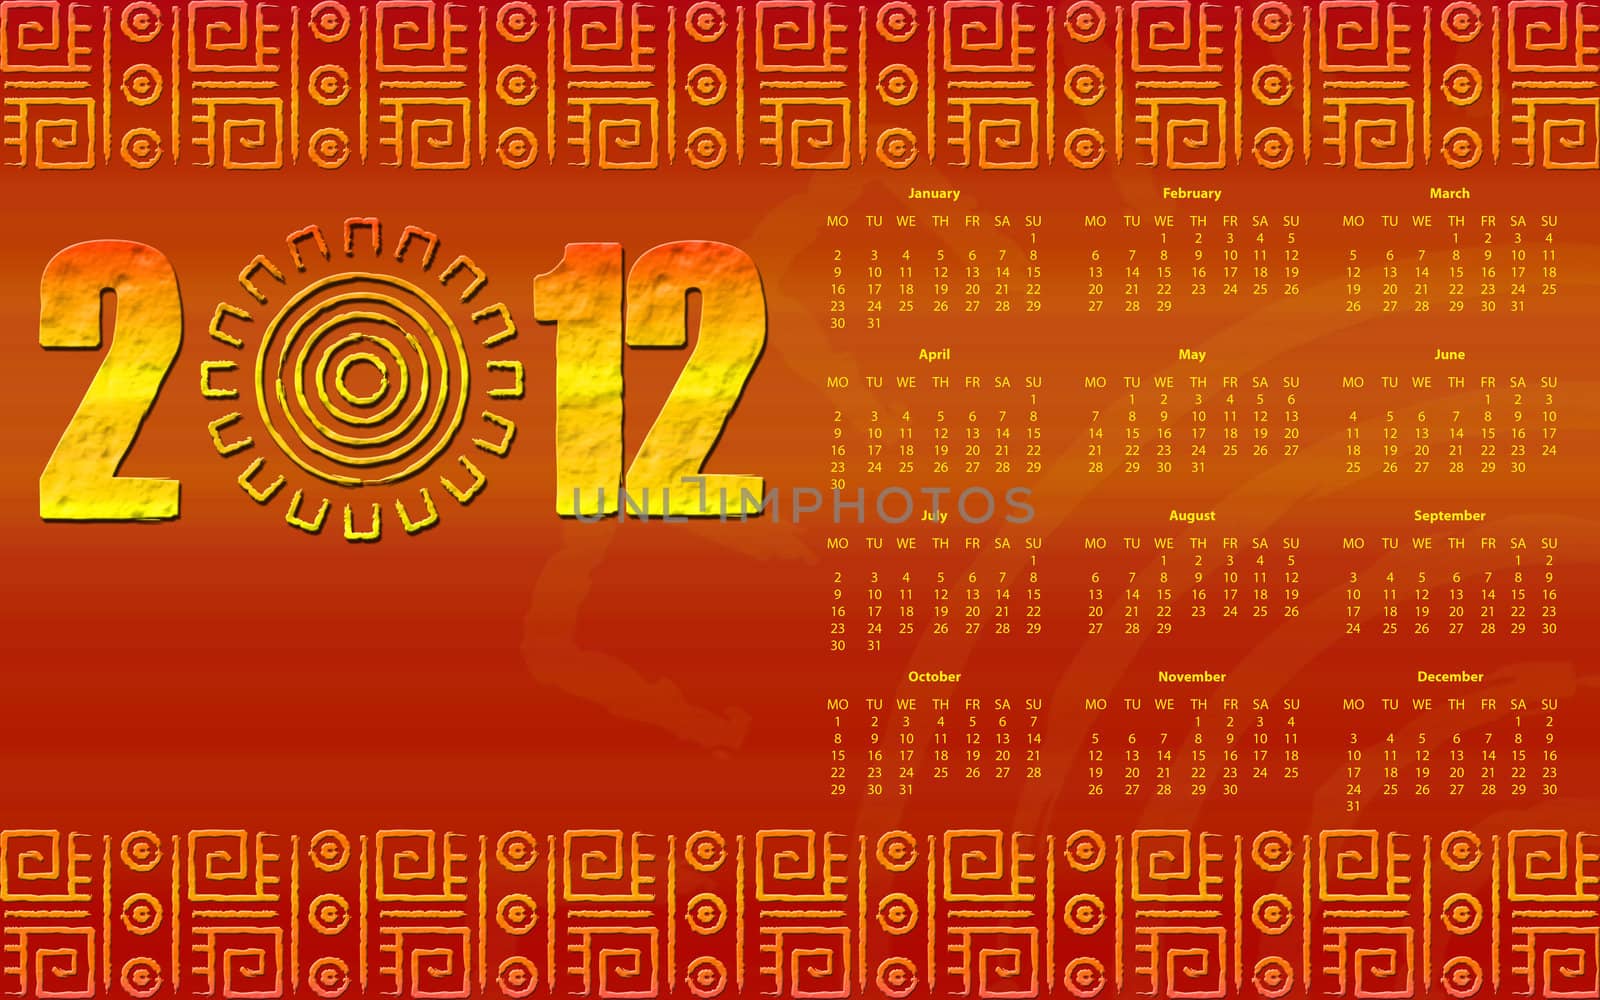 We see Calendar for 2012 with Mayan glyphs